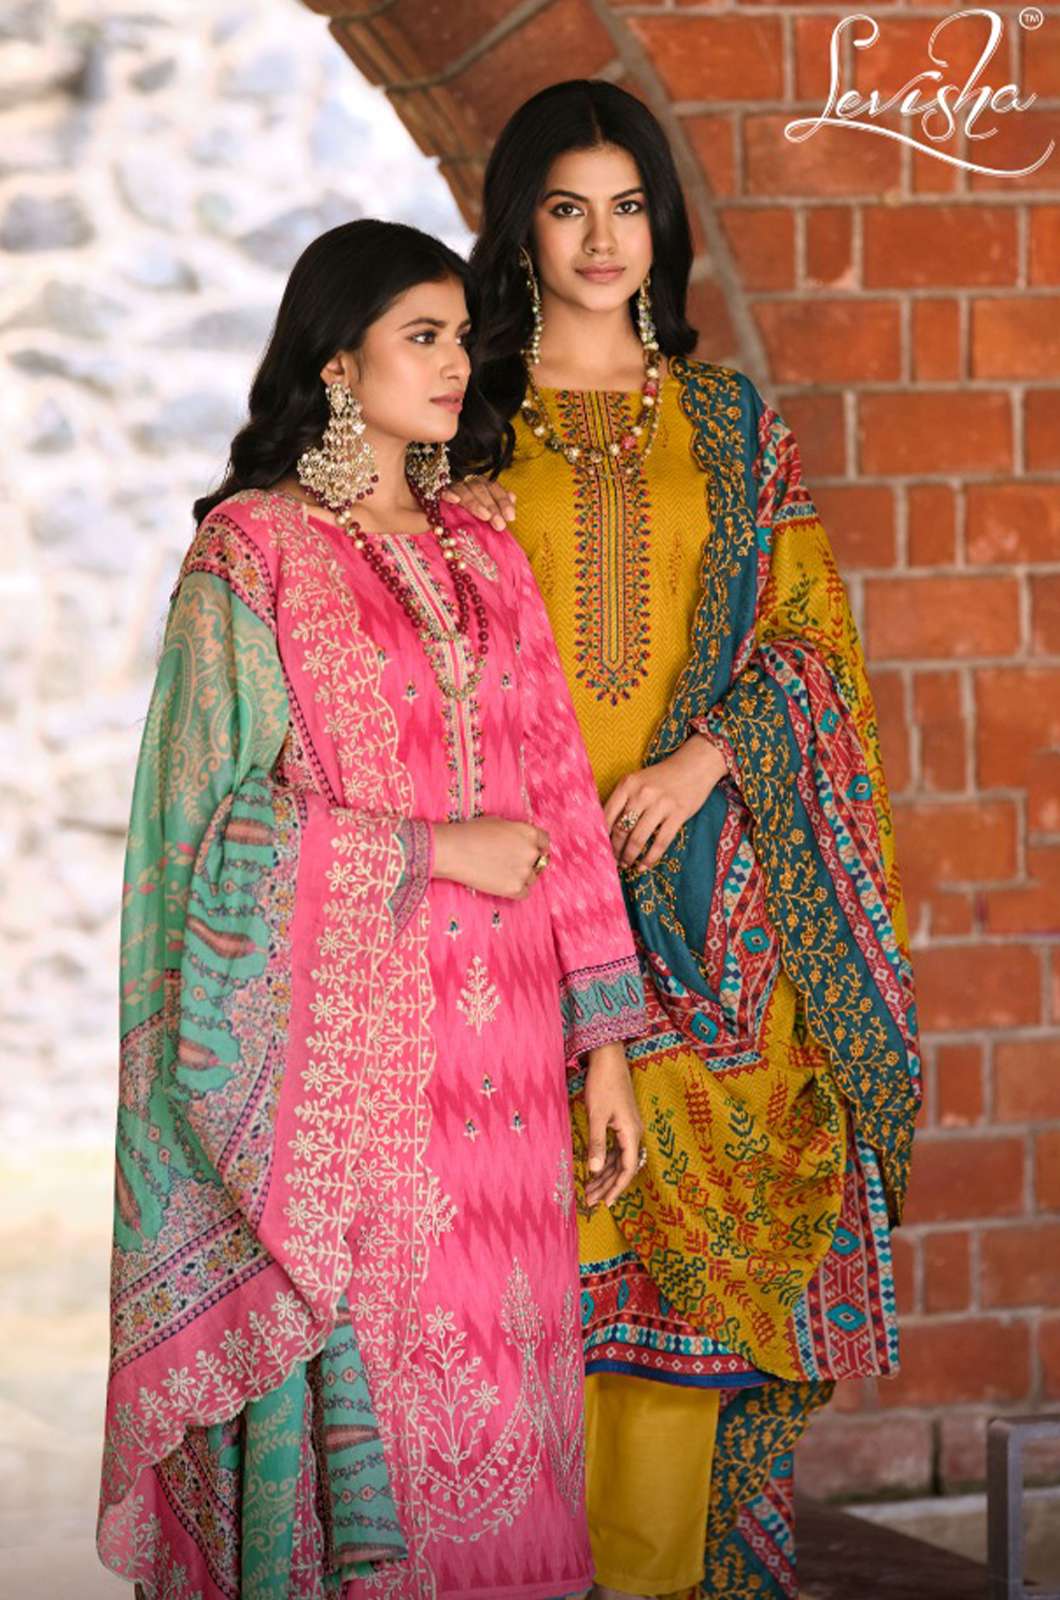 LEVISHA BINSAEED Cemric Cotton Printed Suit With Fancy Self Embroidery